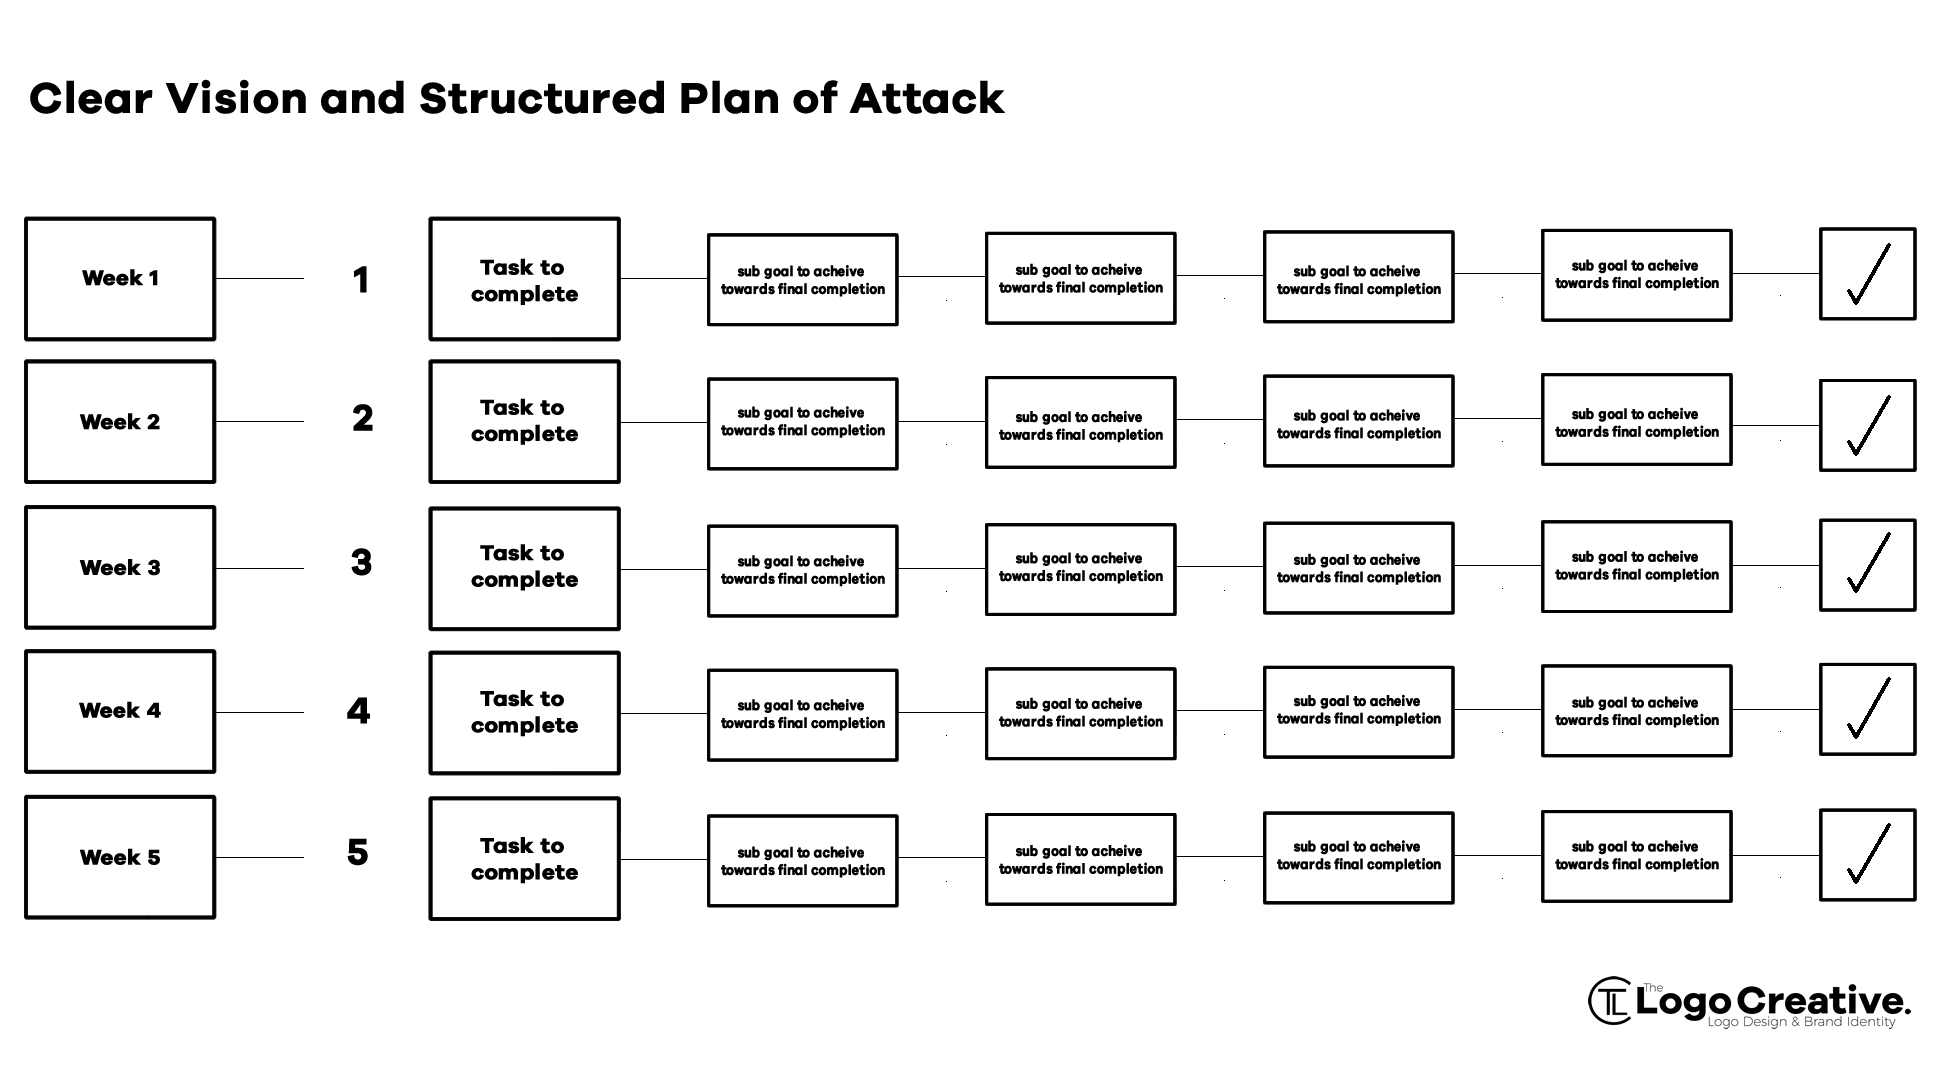 How to Have a Clear Vision and Structured Plan of Attack